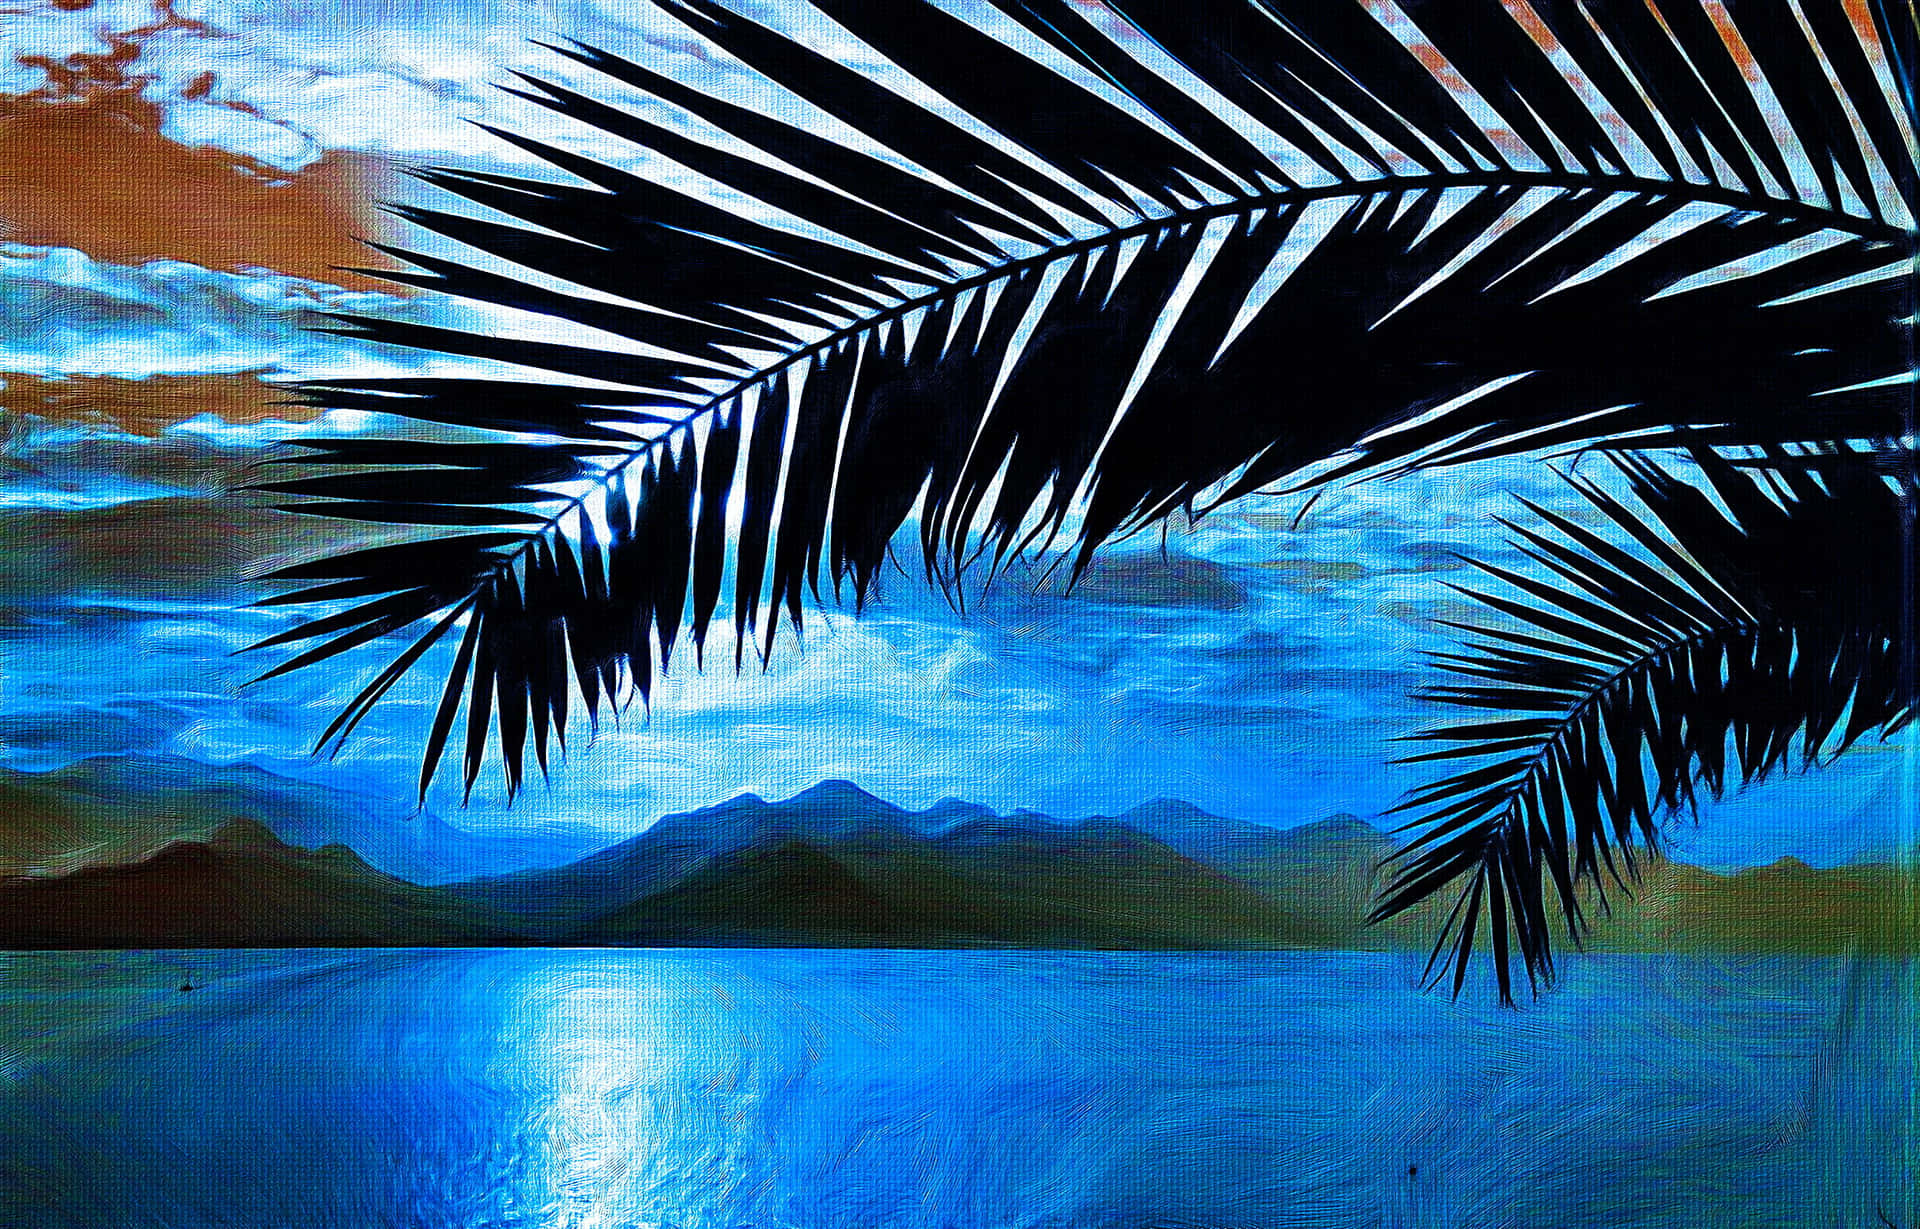 Enjoy a Beautiful Summer Day by the Beach with this Palm Tree Desktop Background Wallpaper